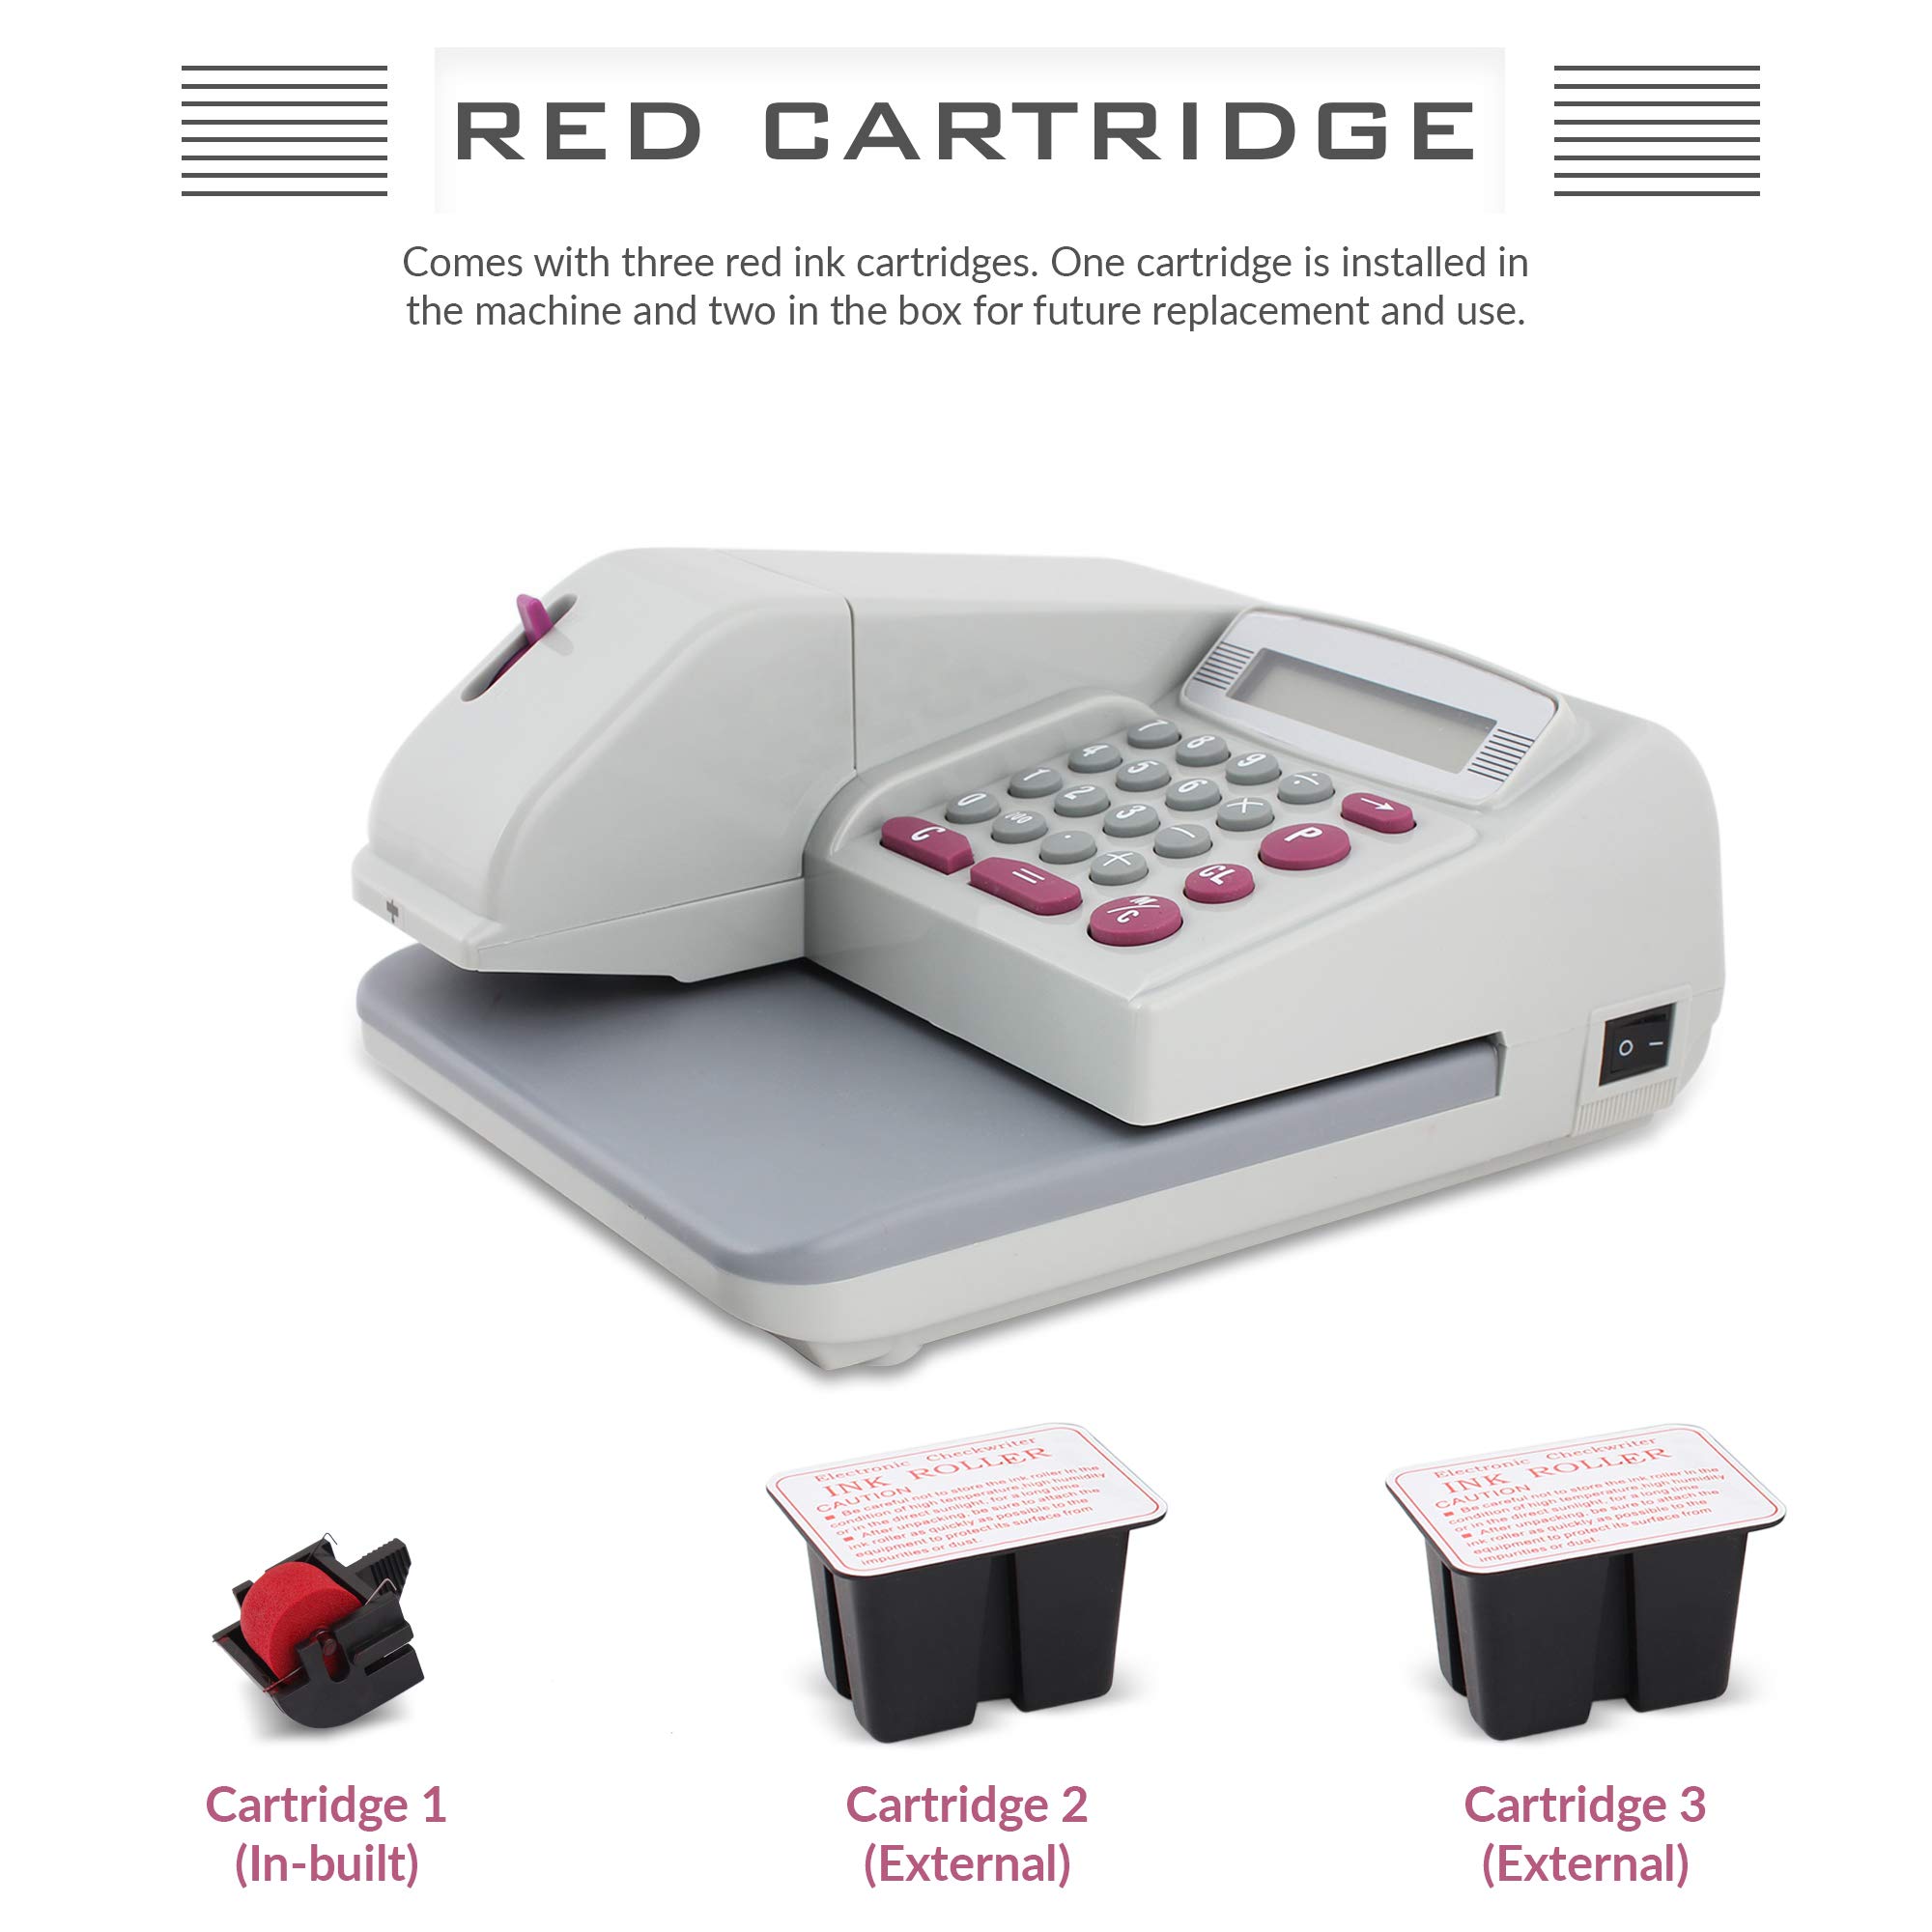 UBICON Checkwriter with Two Additional Ink Cartridges (RX200UBI), Red